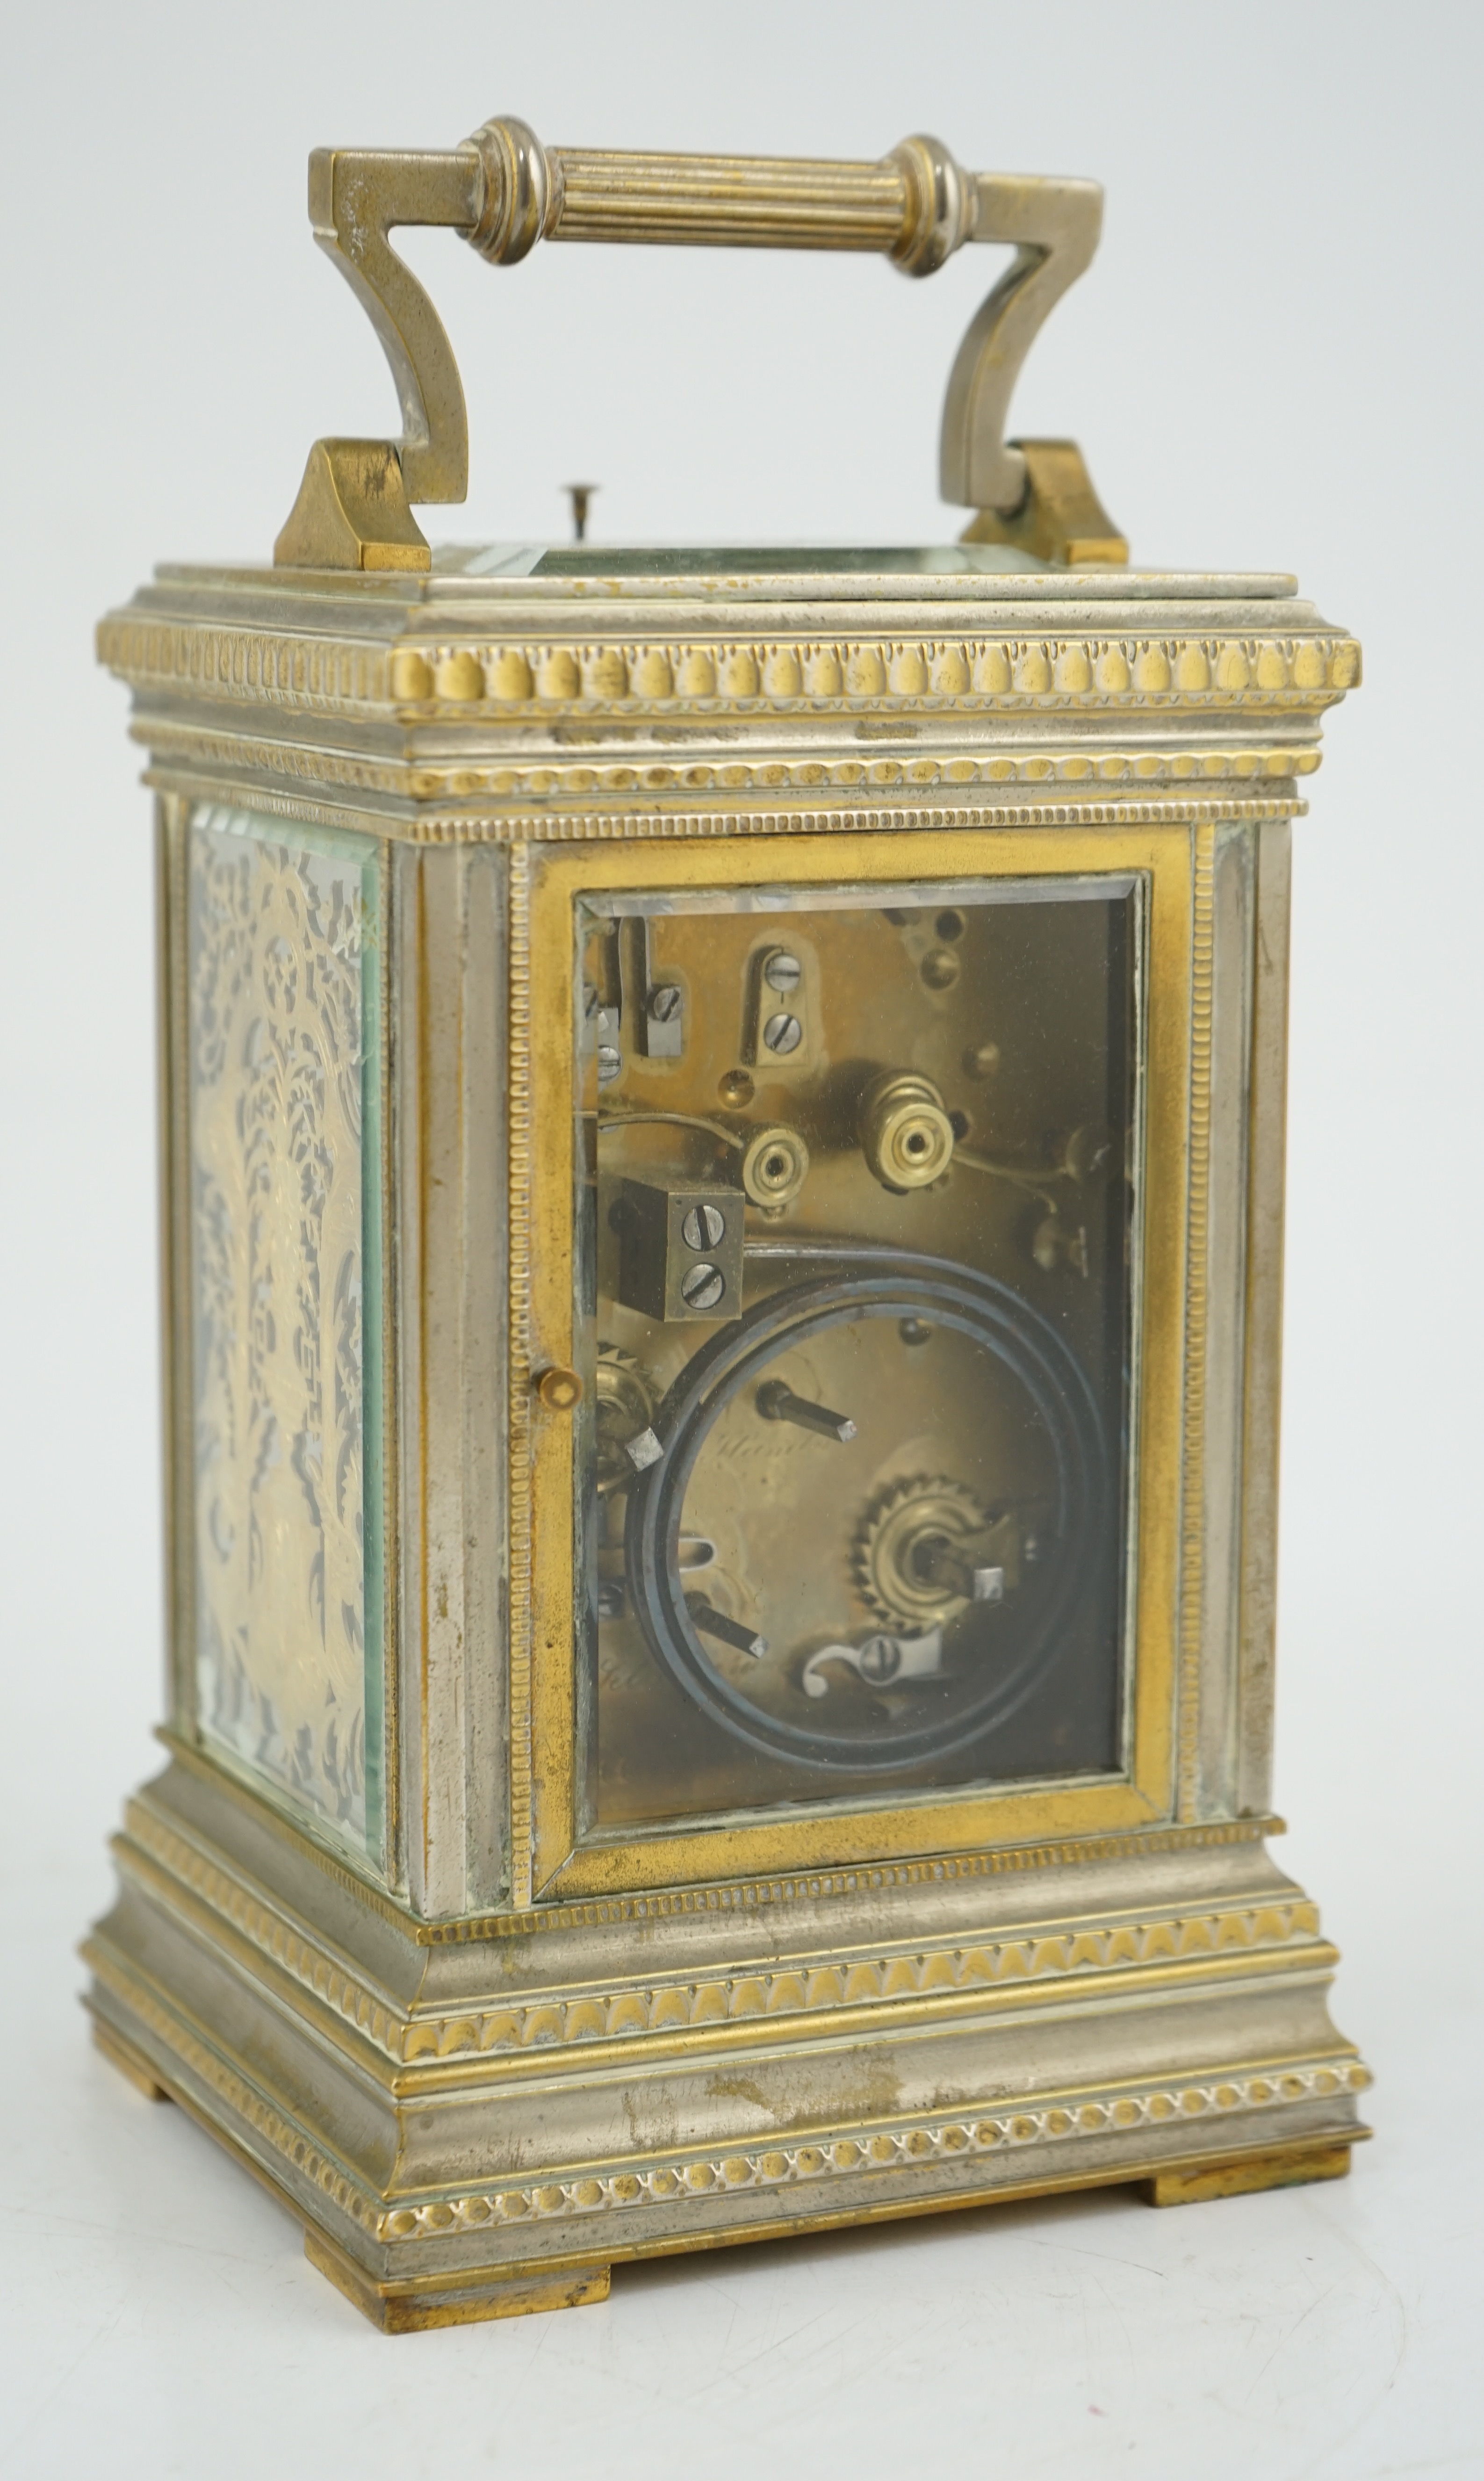 An early 20th century French silvered brass grand sonnerie alarum carriage clock